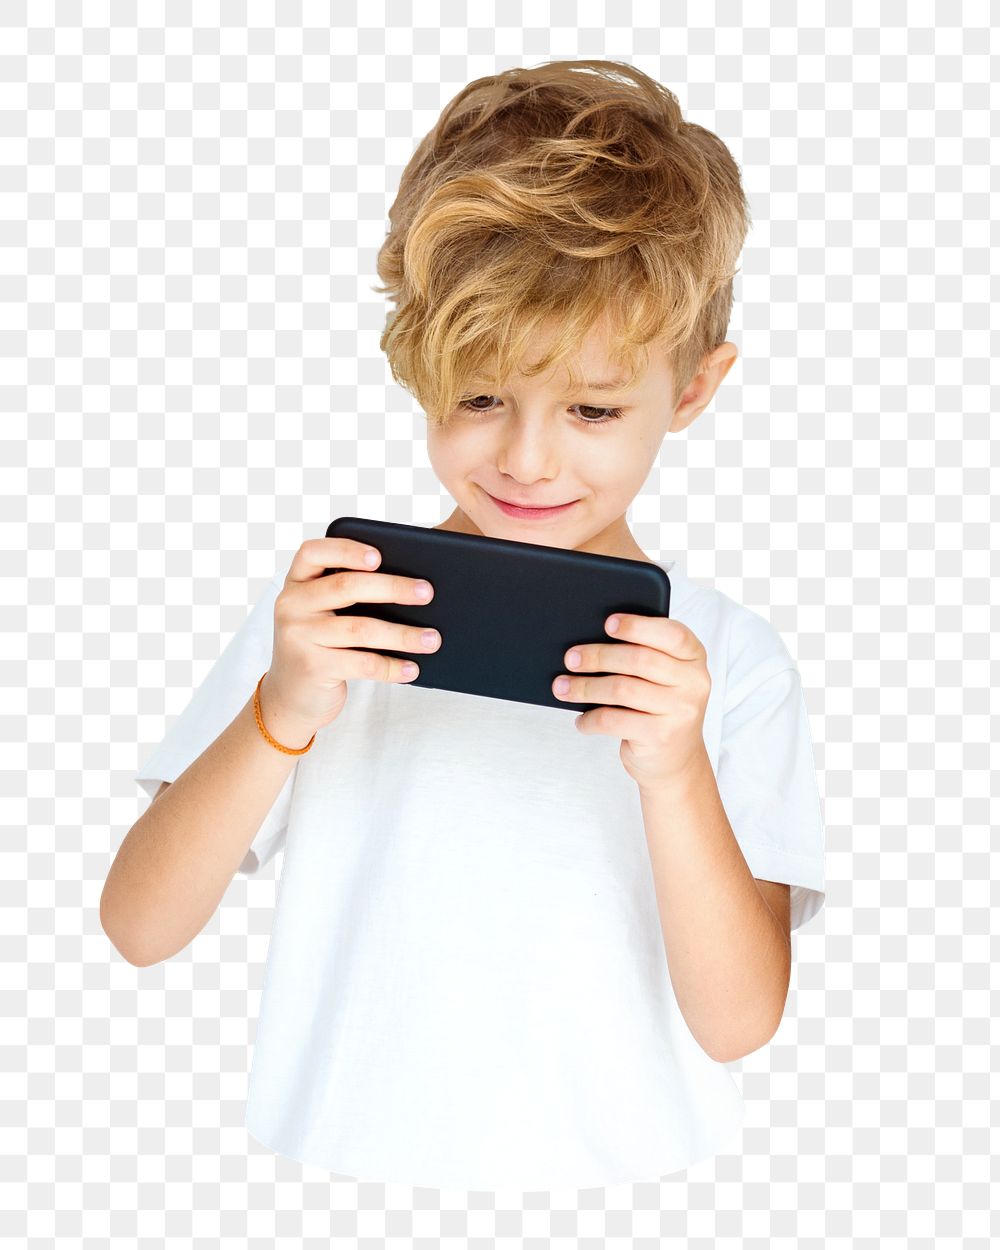 Png boy playing phone sticker, transparent background